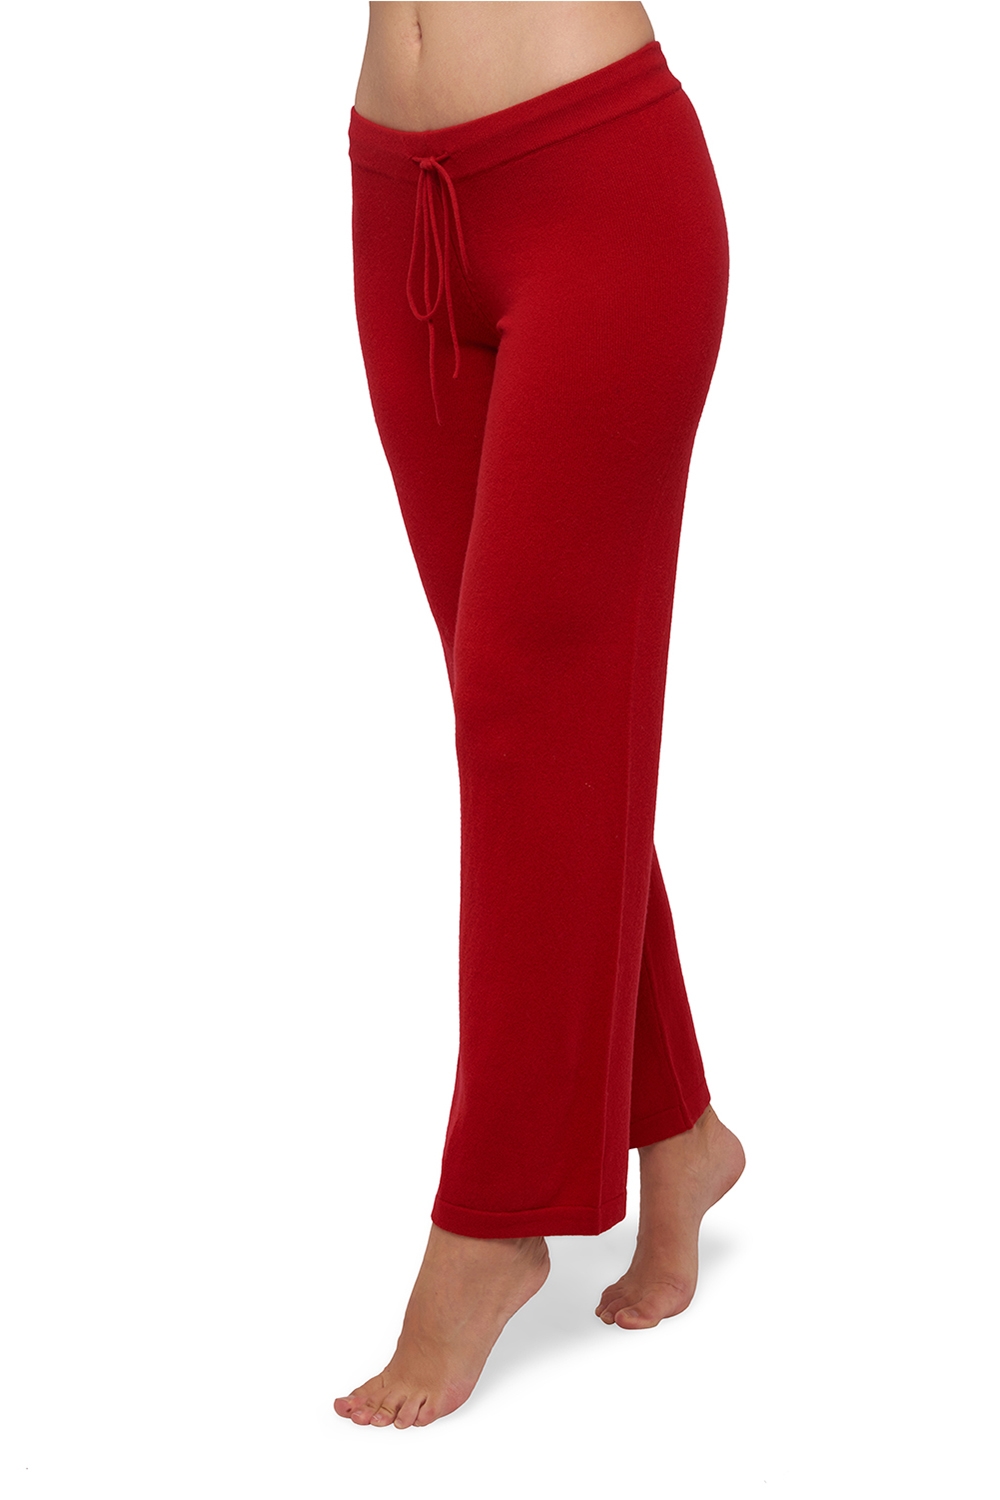 Cashmere ladies trousers leggings malice blood red s